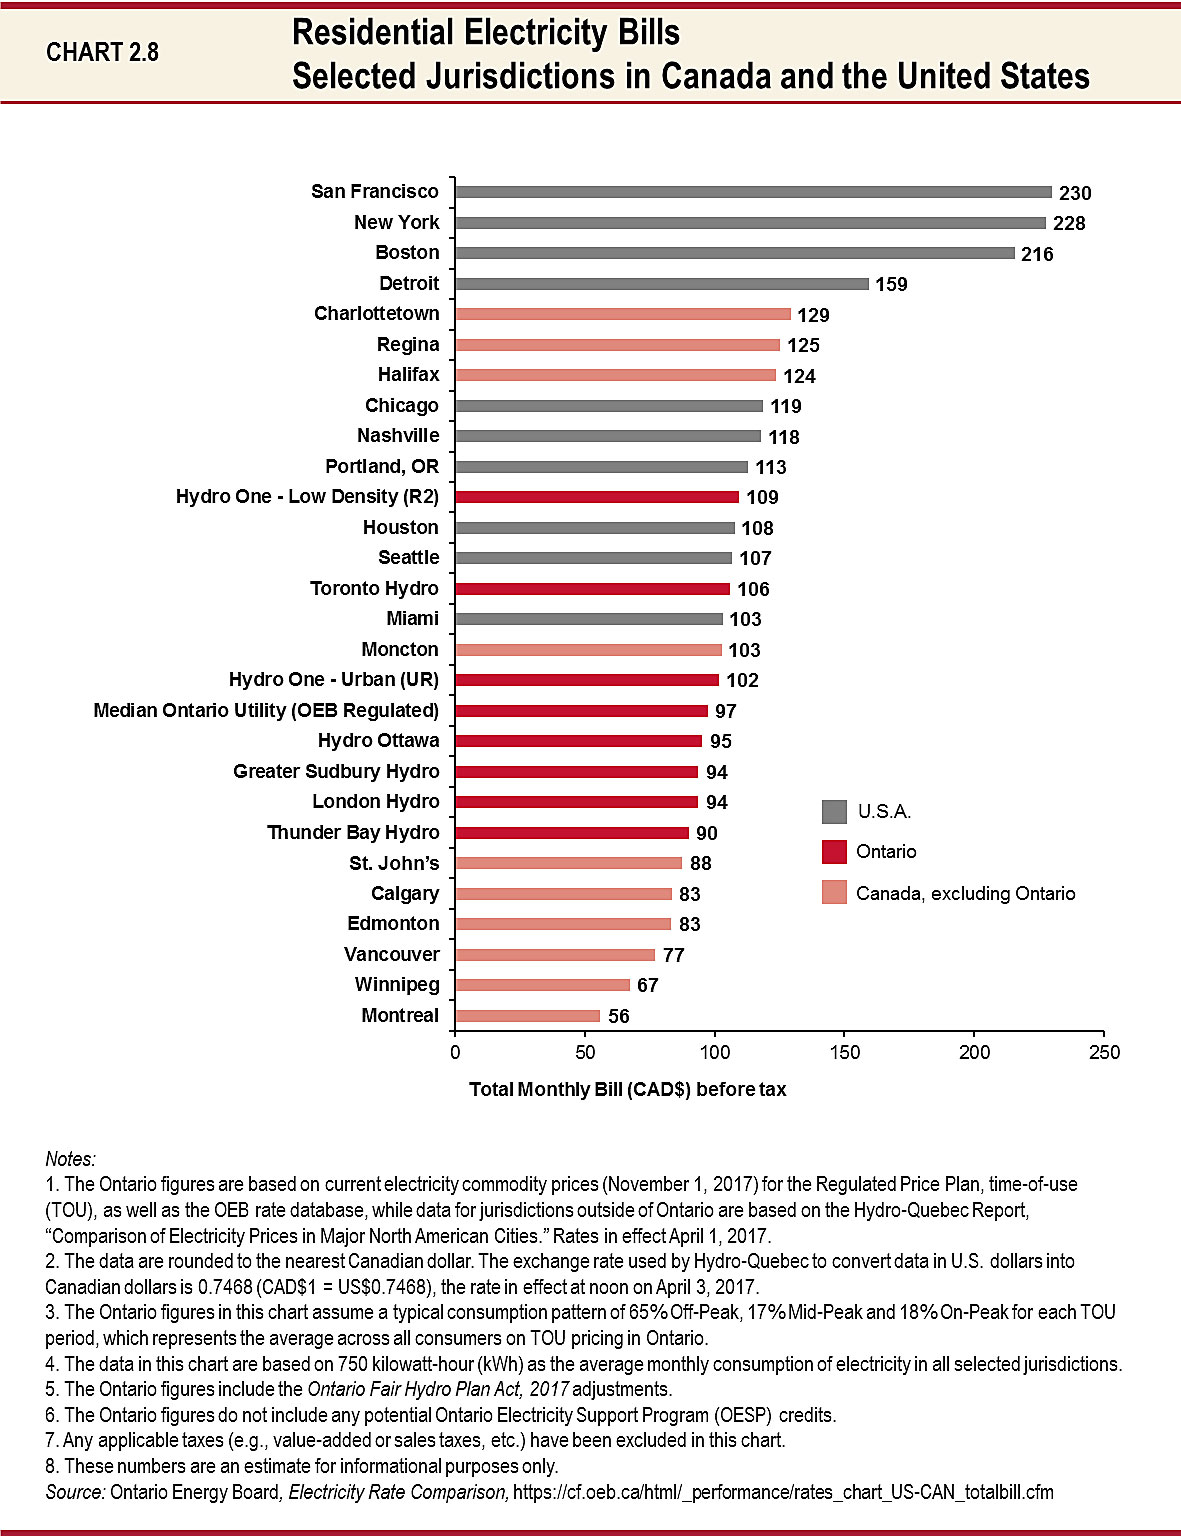 Chart 2.8: Residential Electricity Bills — Selected Jurisdictions in Canada and the United States